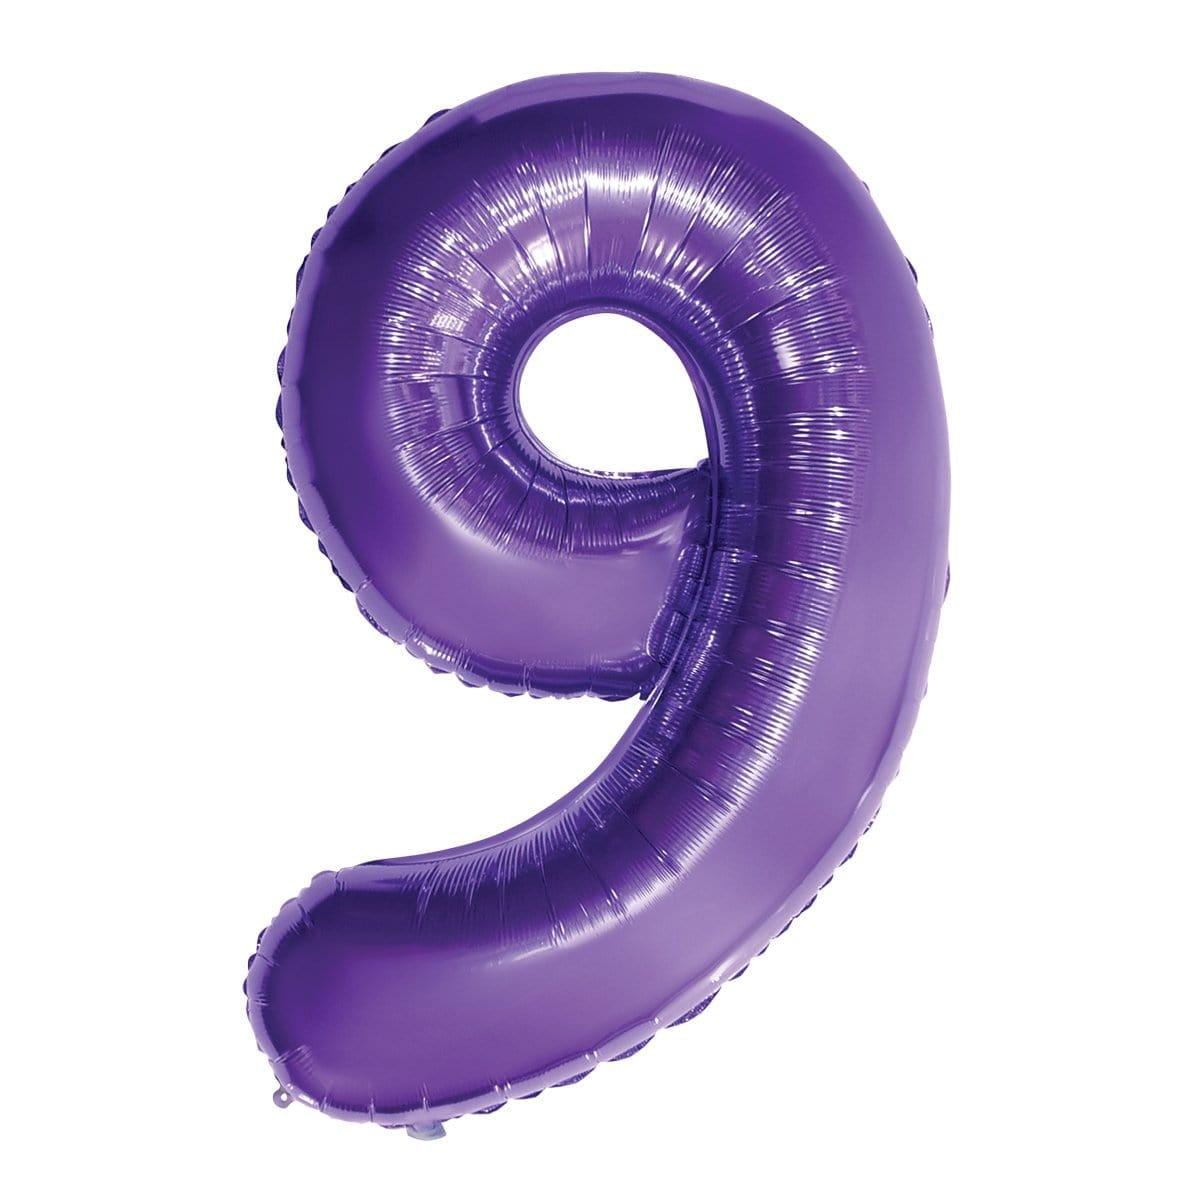 Buy Balloons Purple Number 9 Foil Balloon, 34 Inches sold at Party Expert